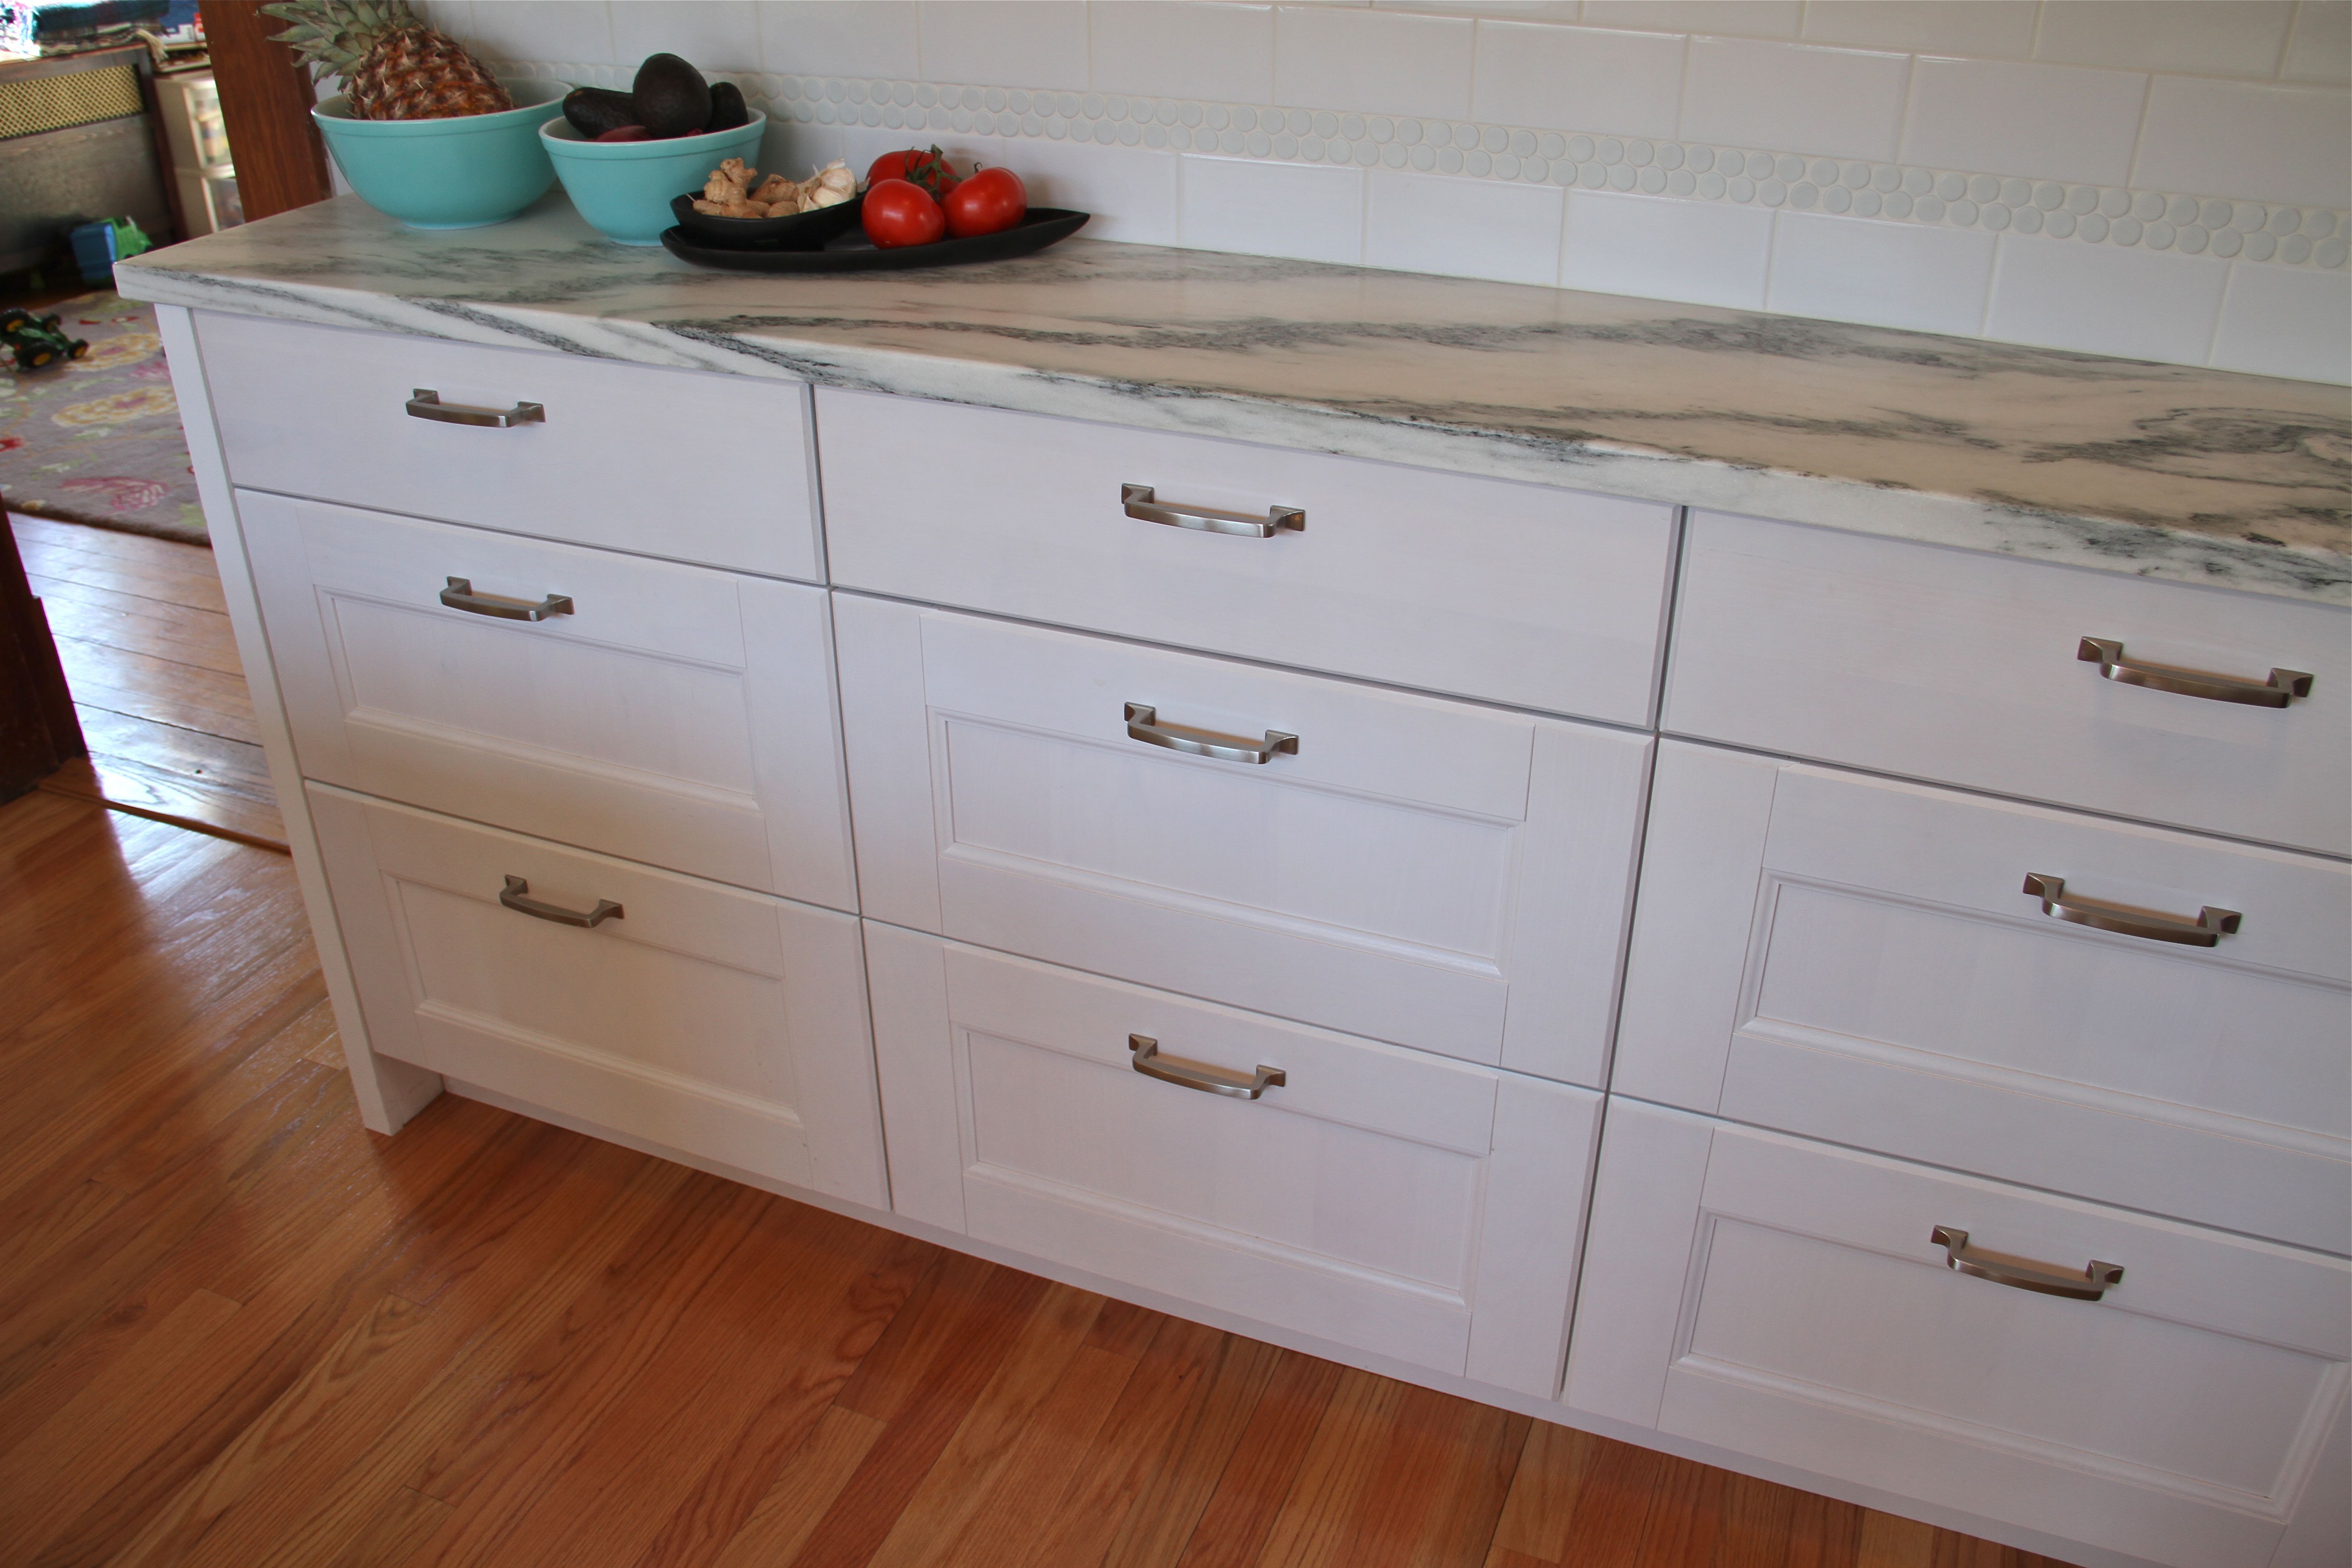 AFTER: Mr and Mrs K were able to find shallow depth lower cabinets in completely non-custom IKEA cabinetry (which was dressed up a bit by Team Carpentry).